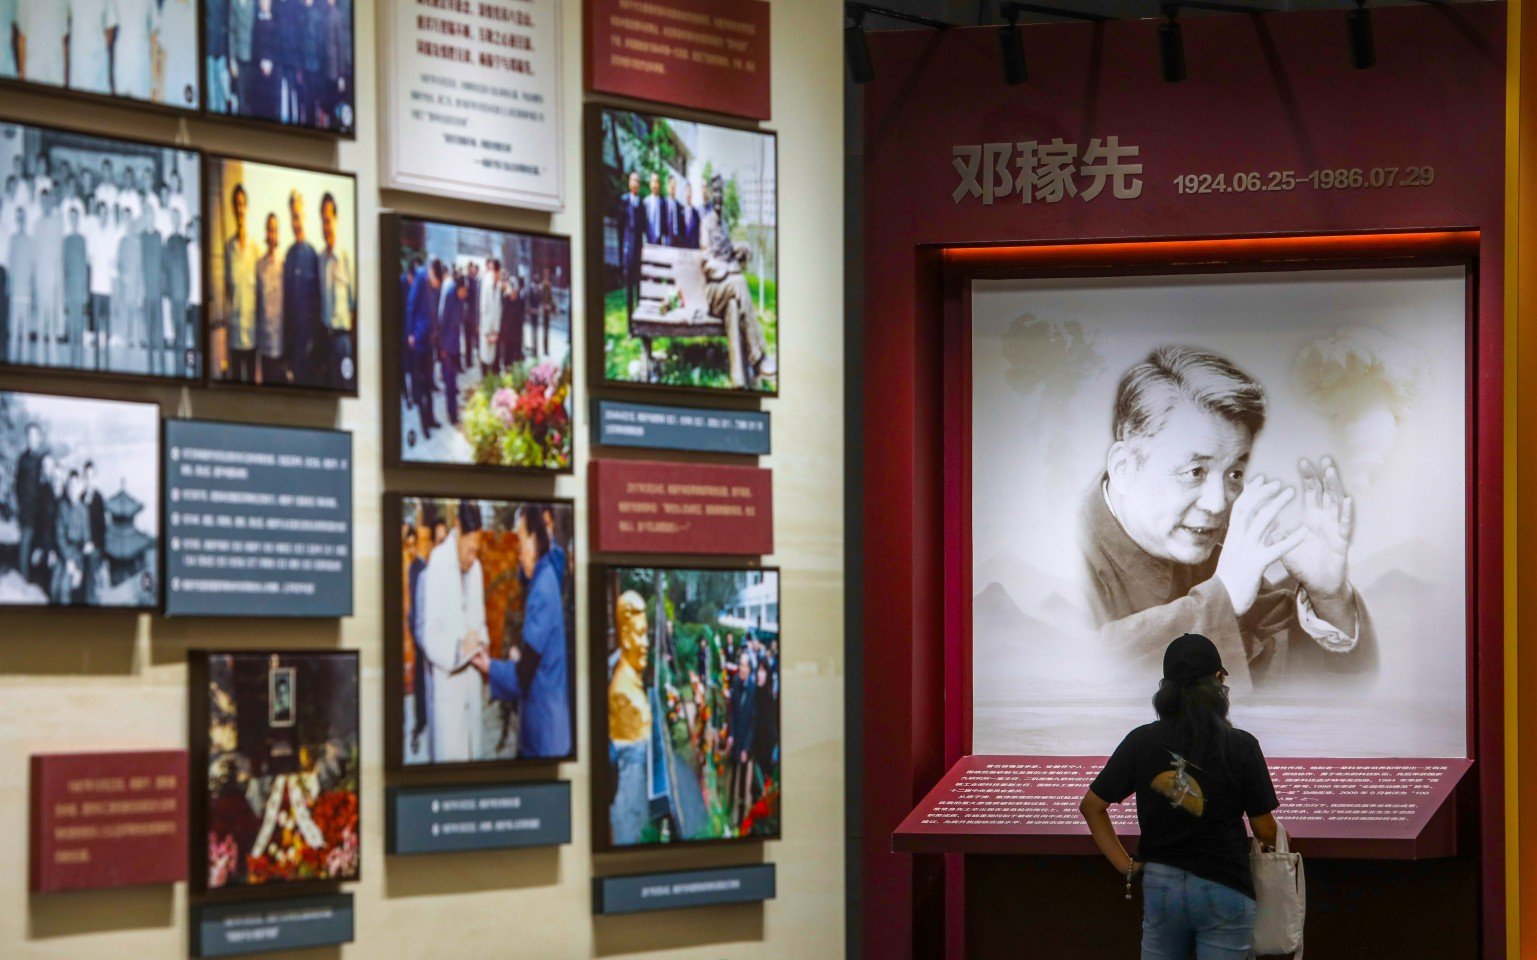 A visitor at an exhibition in commemoration of the centenary of Deng Jiaxian’s birth. Photo: Simon Song